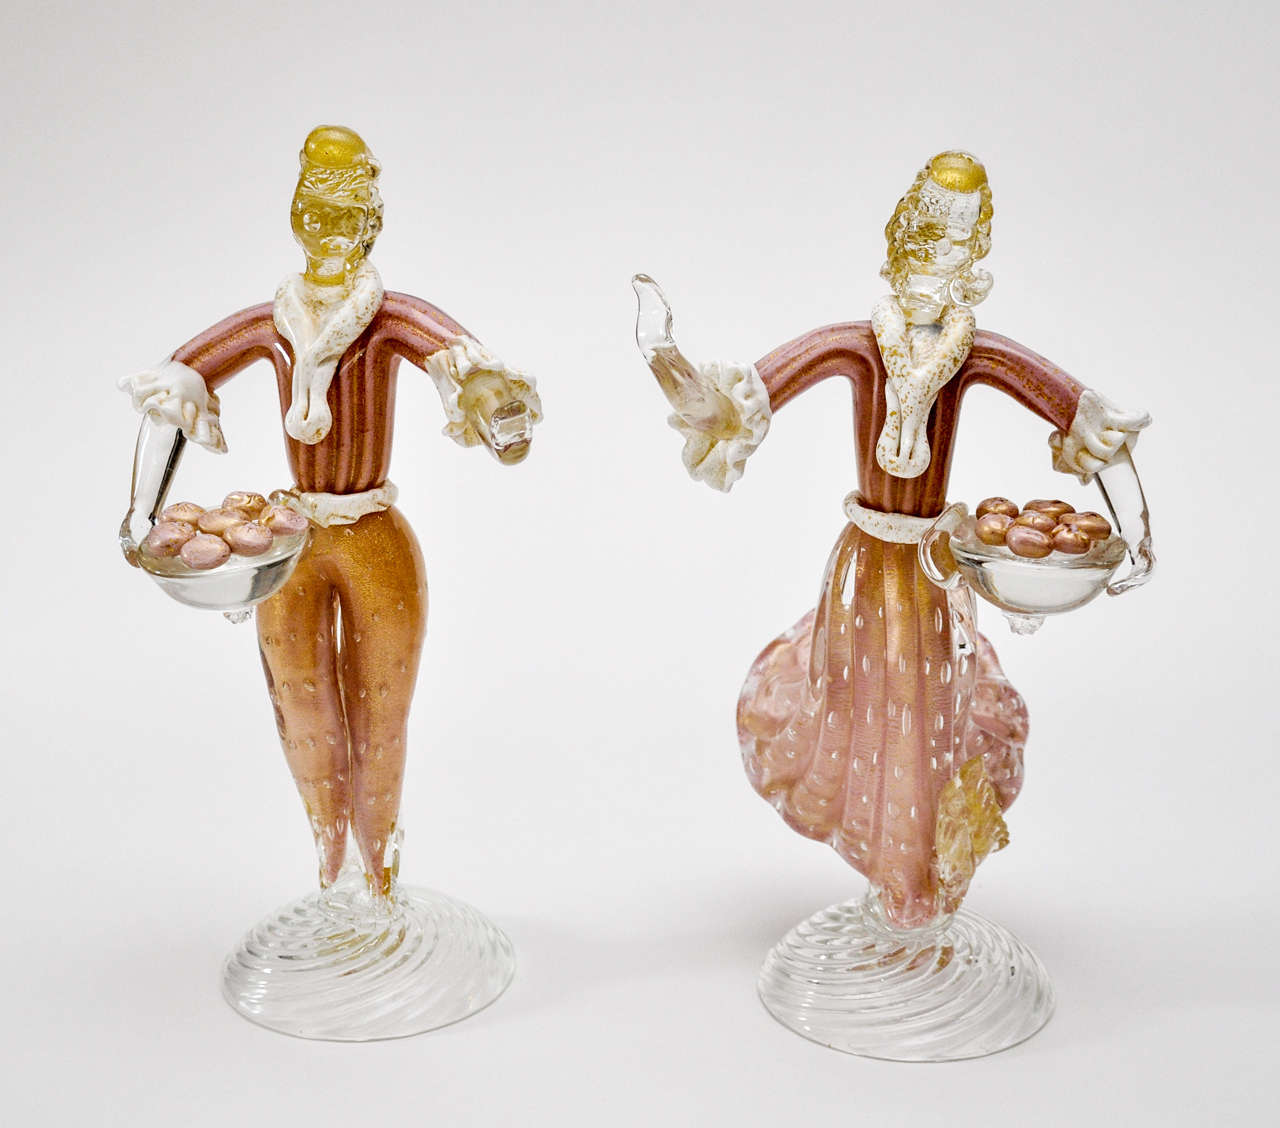 Pair of matched, man and woman, Murano glass figurines. Rose color with flecks of gold throughout figures.